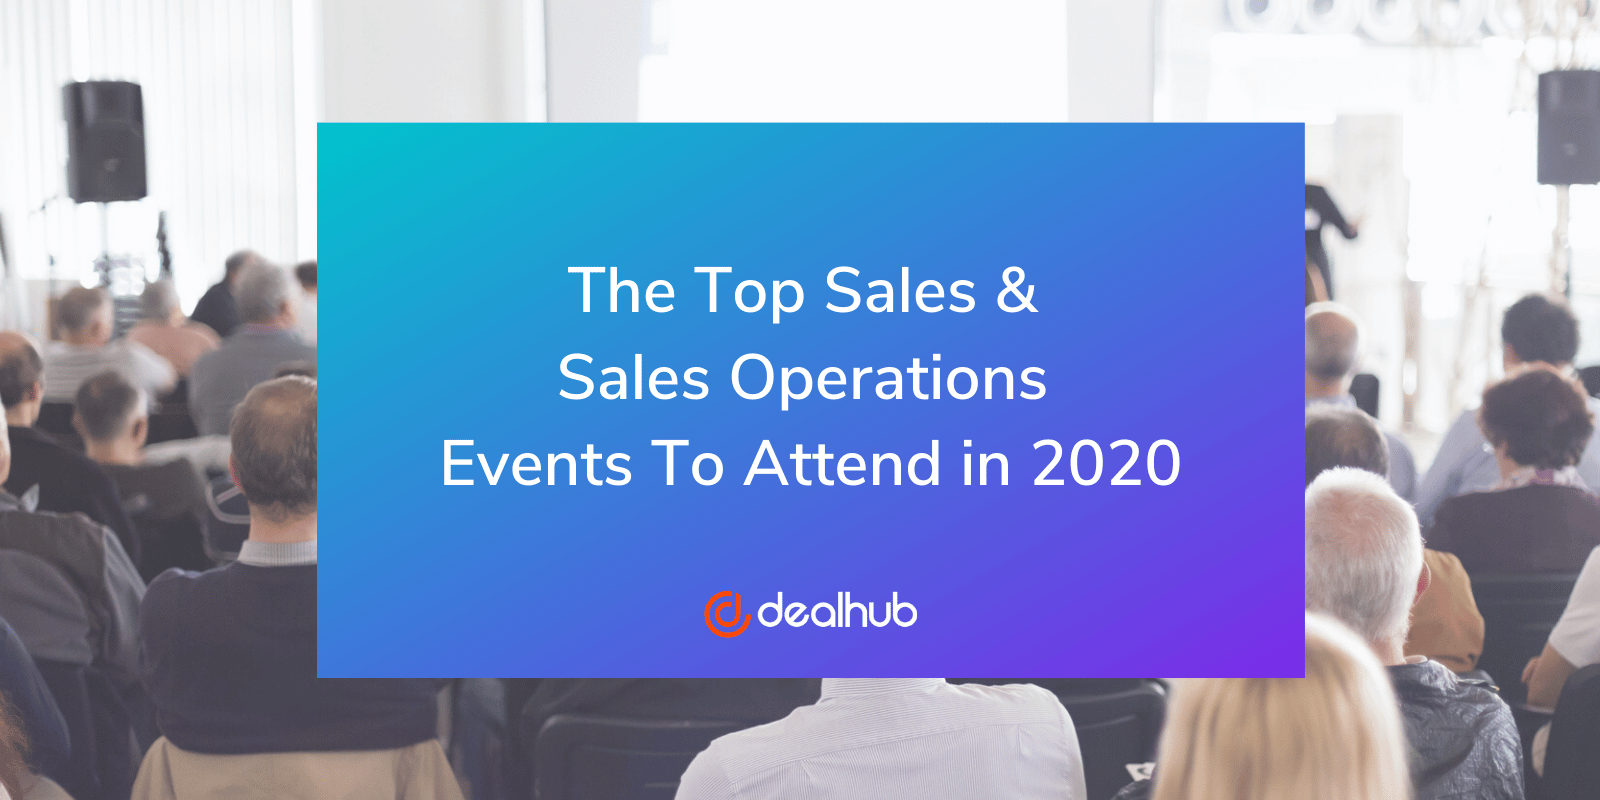 The Top Sales and Sales Operations Events to Attend in 2020